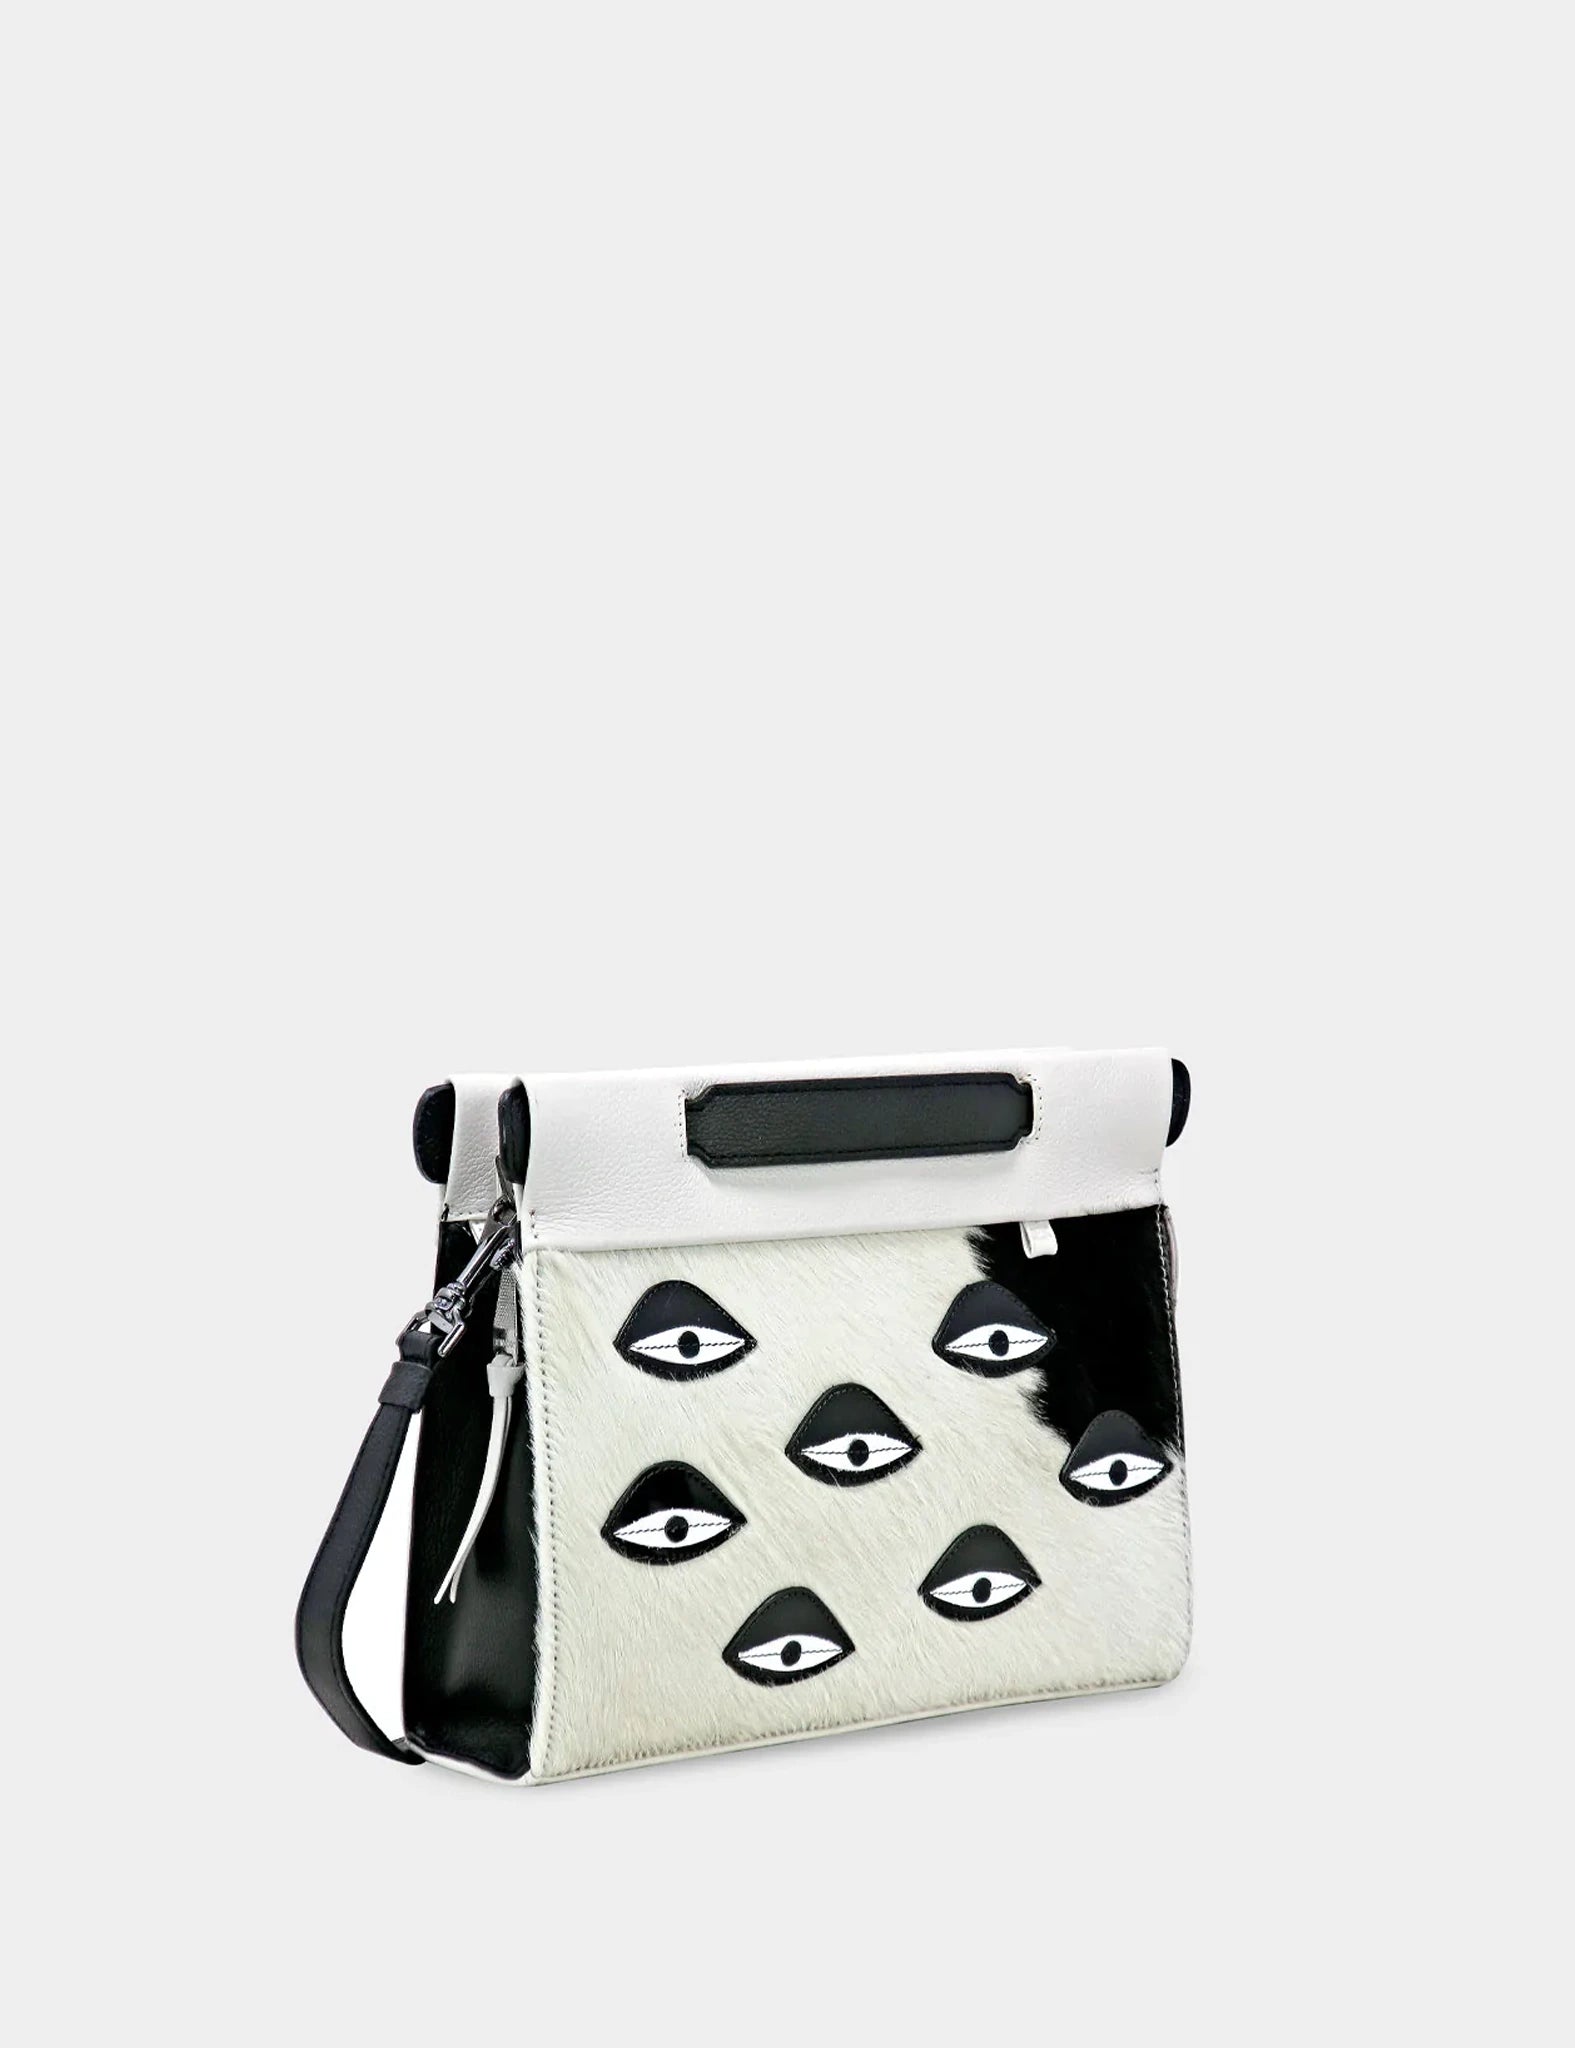 Vali Crossbody Small Cream Leather Bag - Eyes Applique Adjustable Handle - Front corner angle view